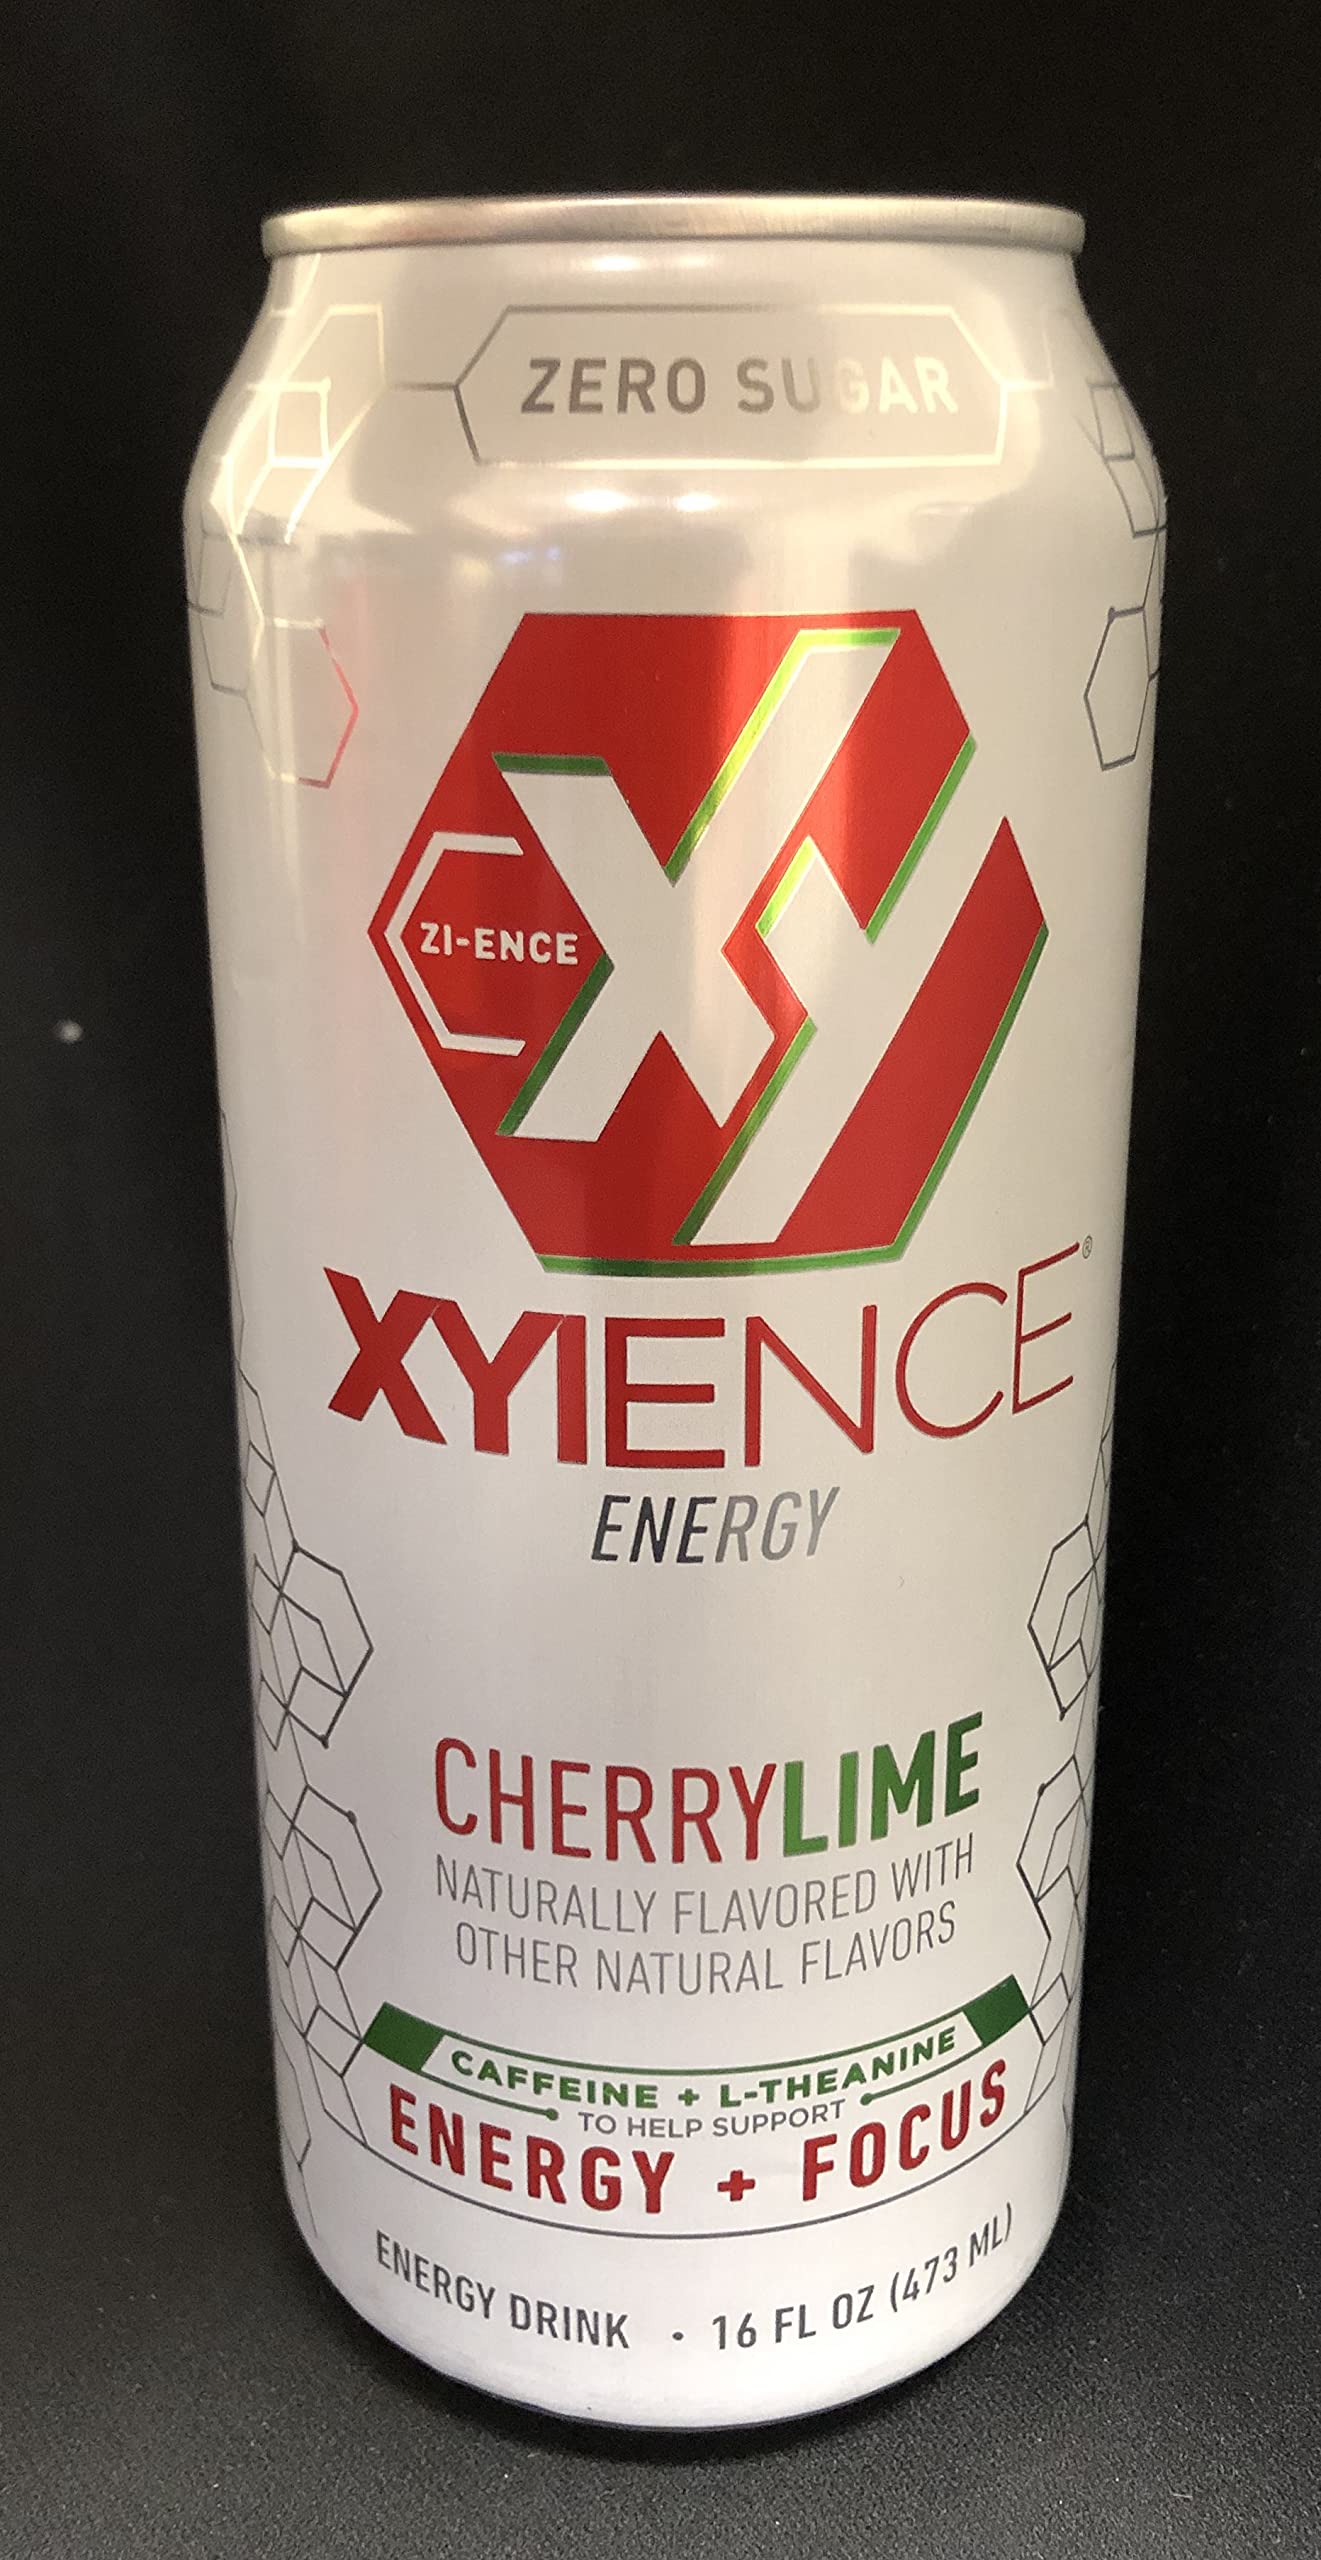 Is Xyience Energy Drink Good For You: Evaluating the Healthfulness of Xyience